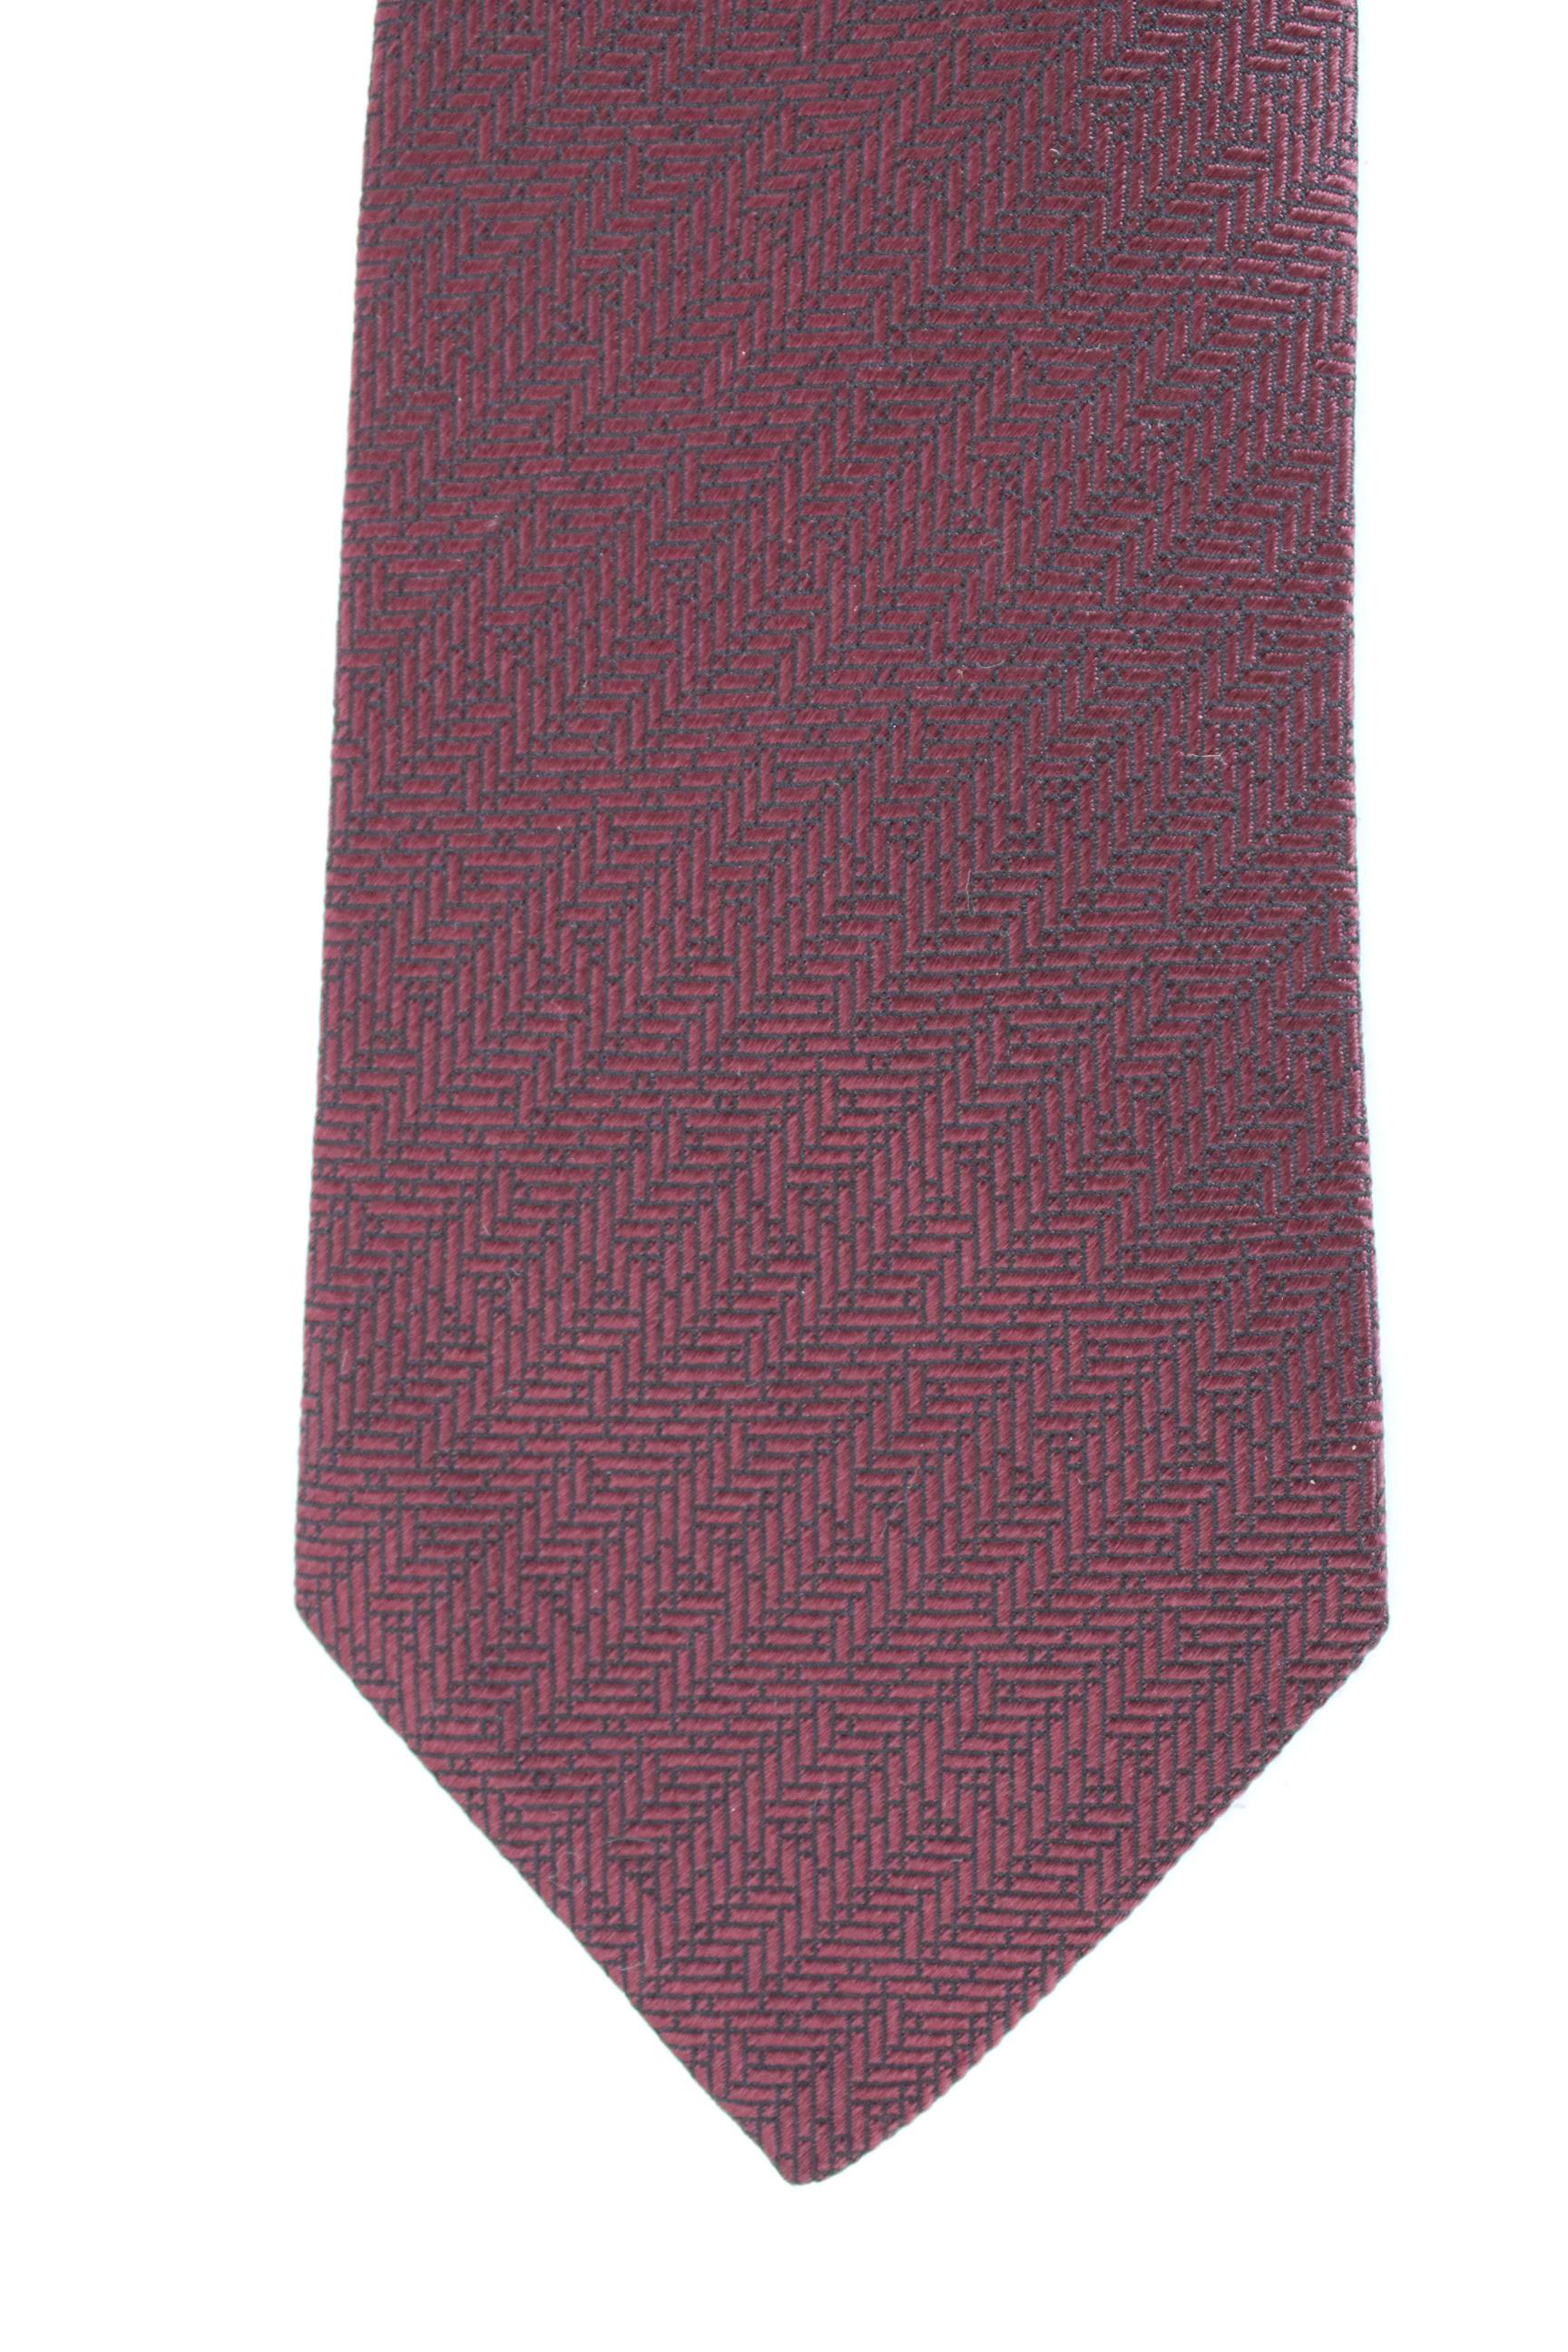 Hermes 90s vintage classic tie. Burgundy color with black geometric designs. 100% silk. Made in France. Excellent vintage conditions.

Length: 146 cm

Width: 9 cm